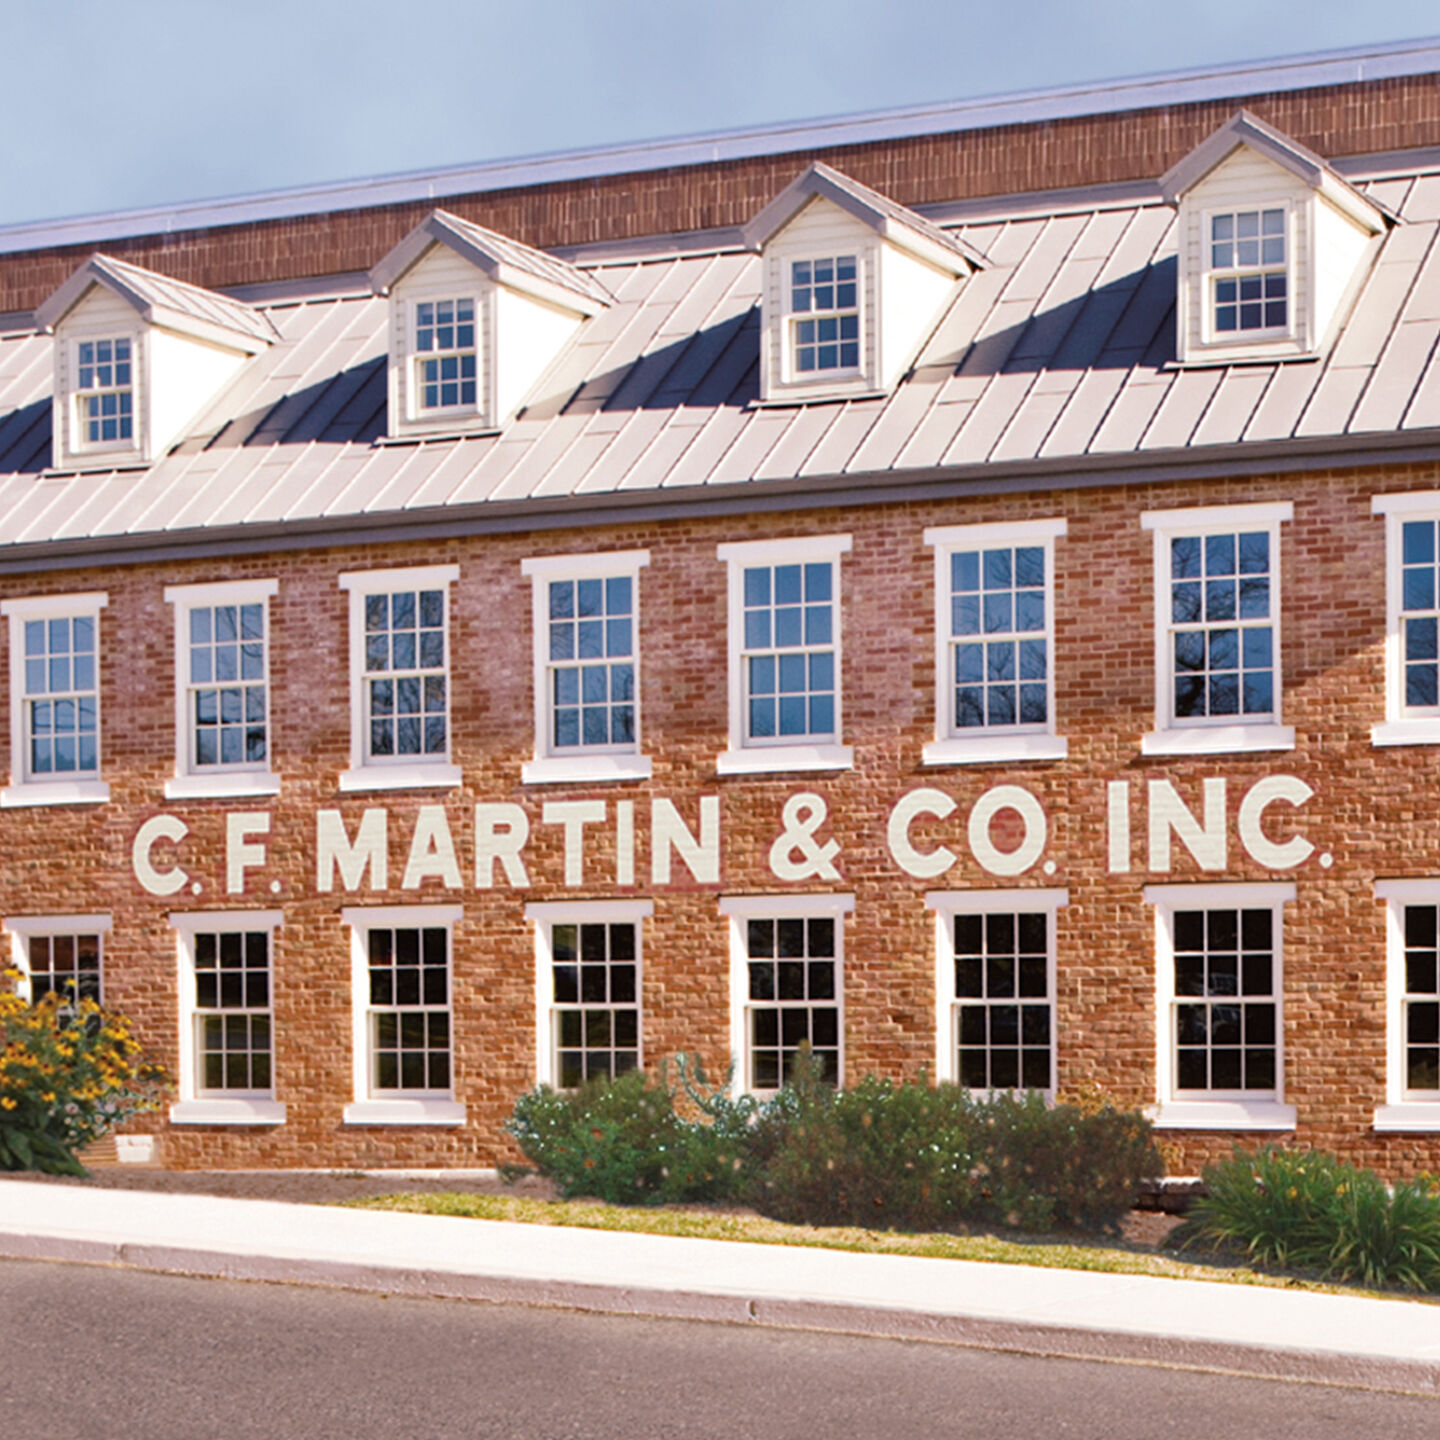 Looking at the Martin factory-an old red brick building with two rows of windows. Painted on the building in white paint is "C.F. MARTIN & CO INC"